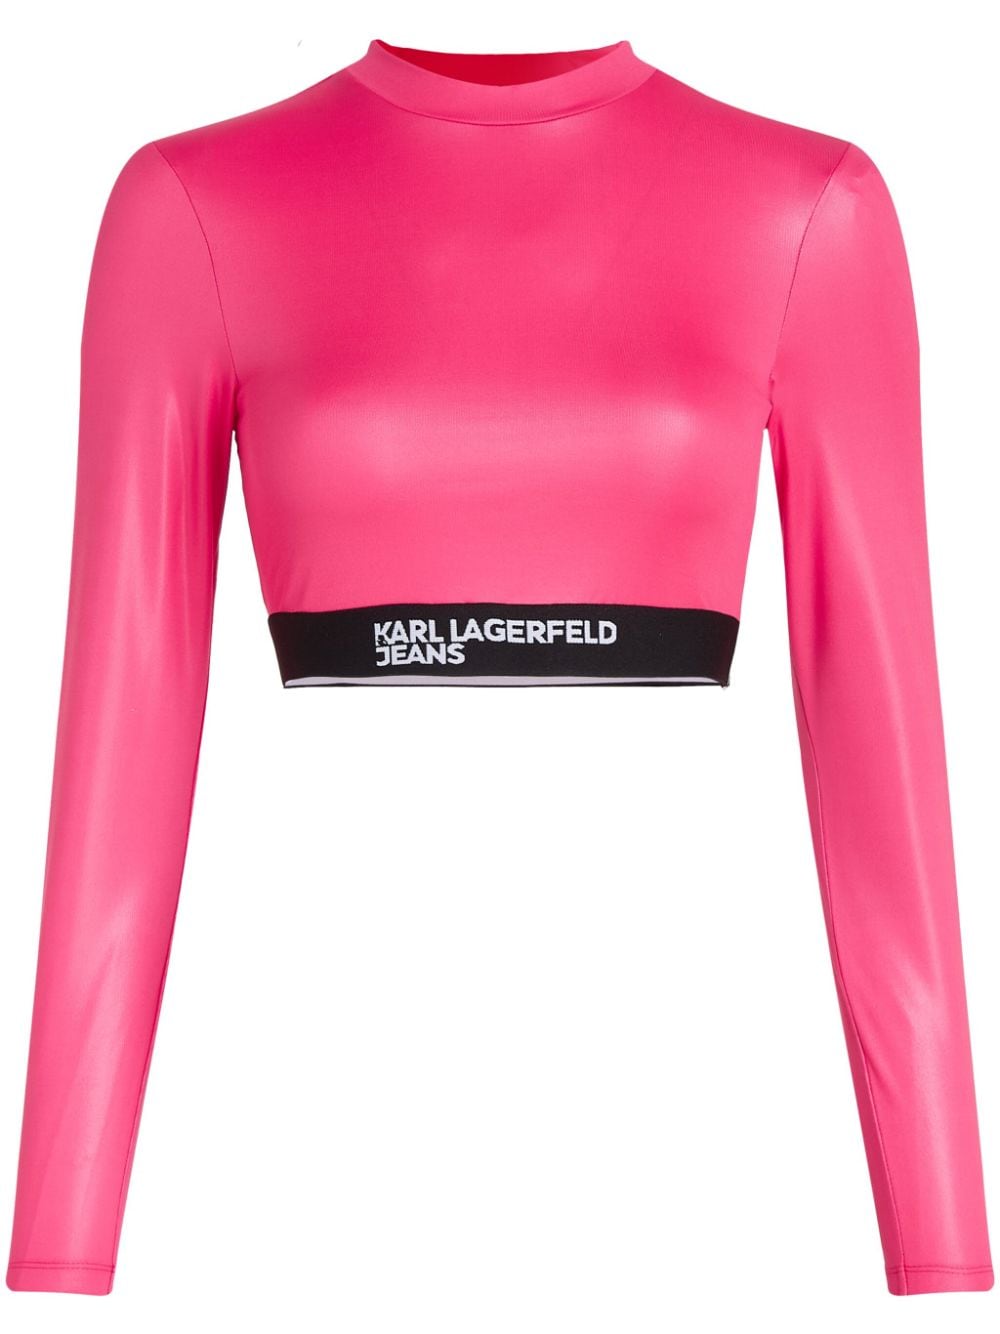 Image 1 of Karl Lagerfeld Jeans long-sleeved cropped T-shirt